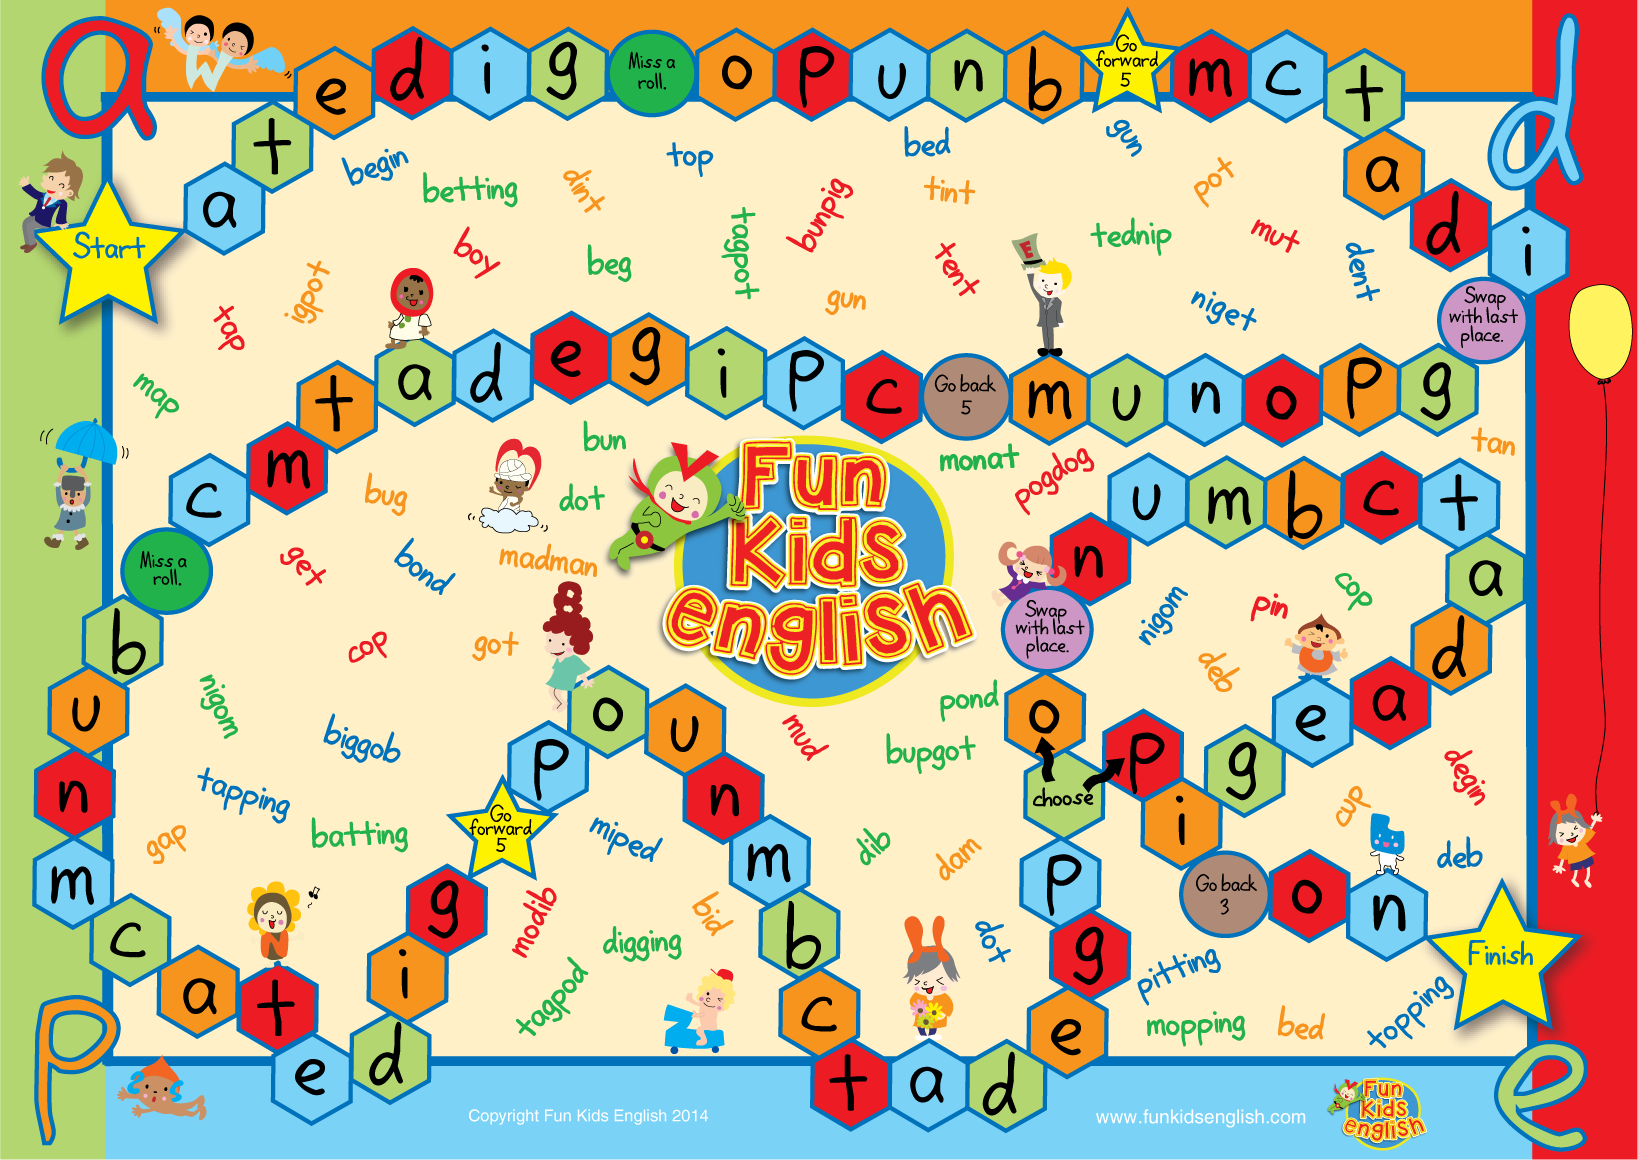 Free Phonics Board Games Children s Songs Children s Phonics Readers Children s Videos Free Educational Materials Reading ABCs Alphabet Free Printables Free Flashcards And Much More Fun Kids English Children s English Learning